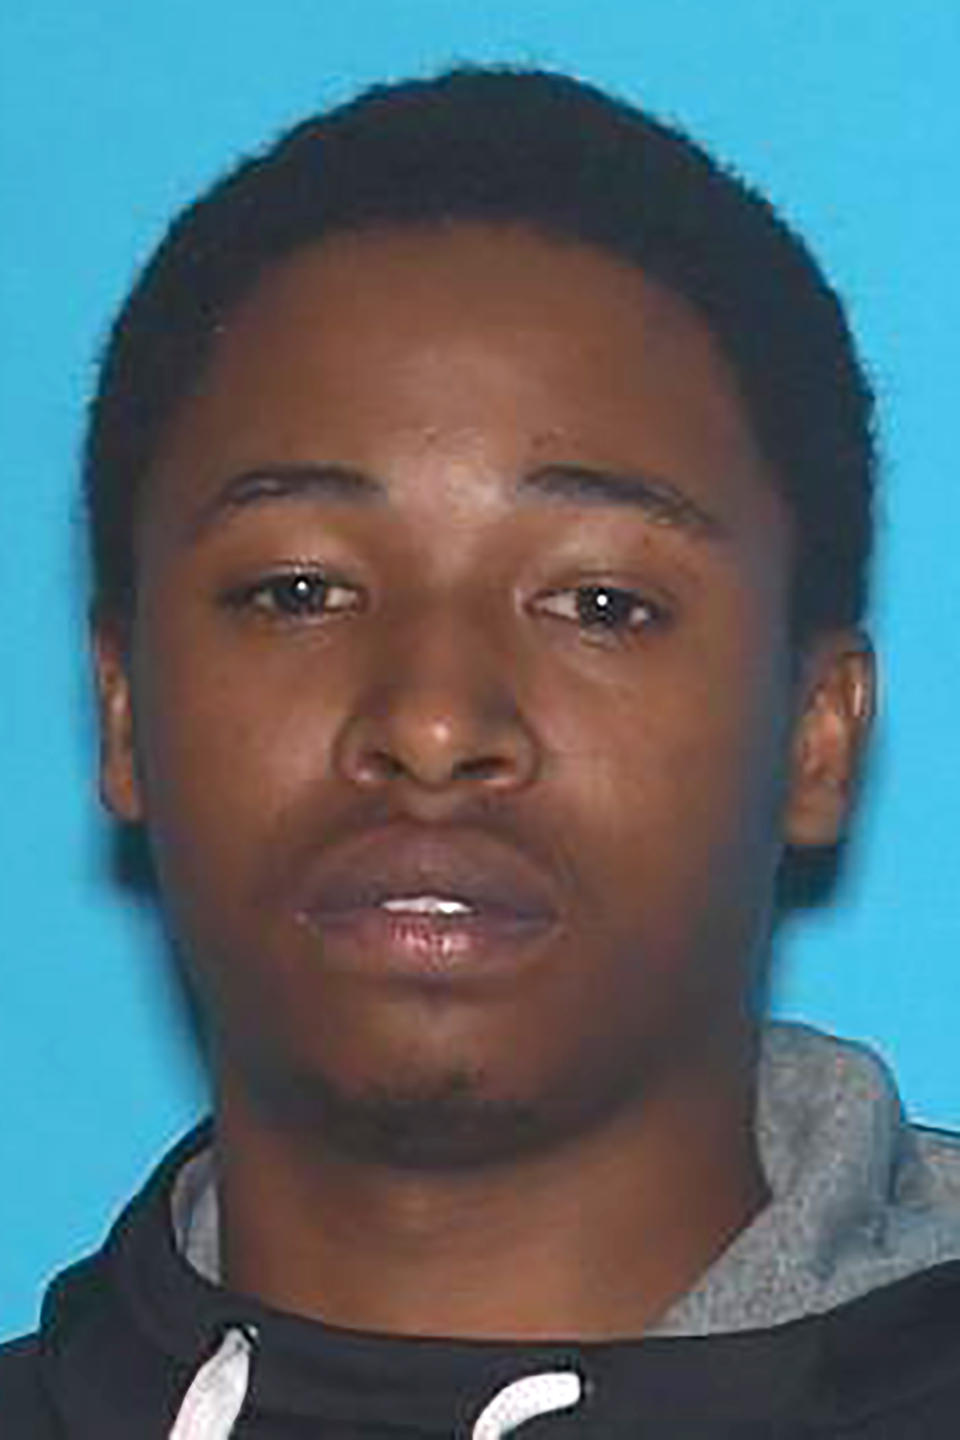 This undated photo provided by the Kansas City Police Department shows Jahron Swift. Swift, who opened fire late Sunday, Jan. 19, 2020, outside a Kansas City nightclub, killing a woman and injuring over a dozen people before a guard killed him, had a past weapons charge dropped after lawmakers loosened the state's gun laws. (Kansas City Police Department via AP)